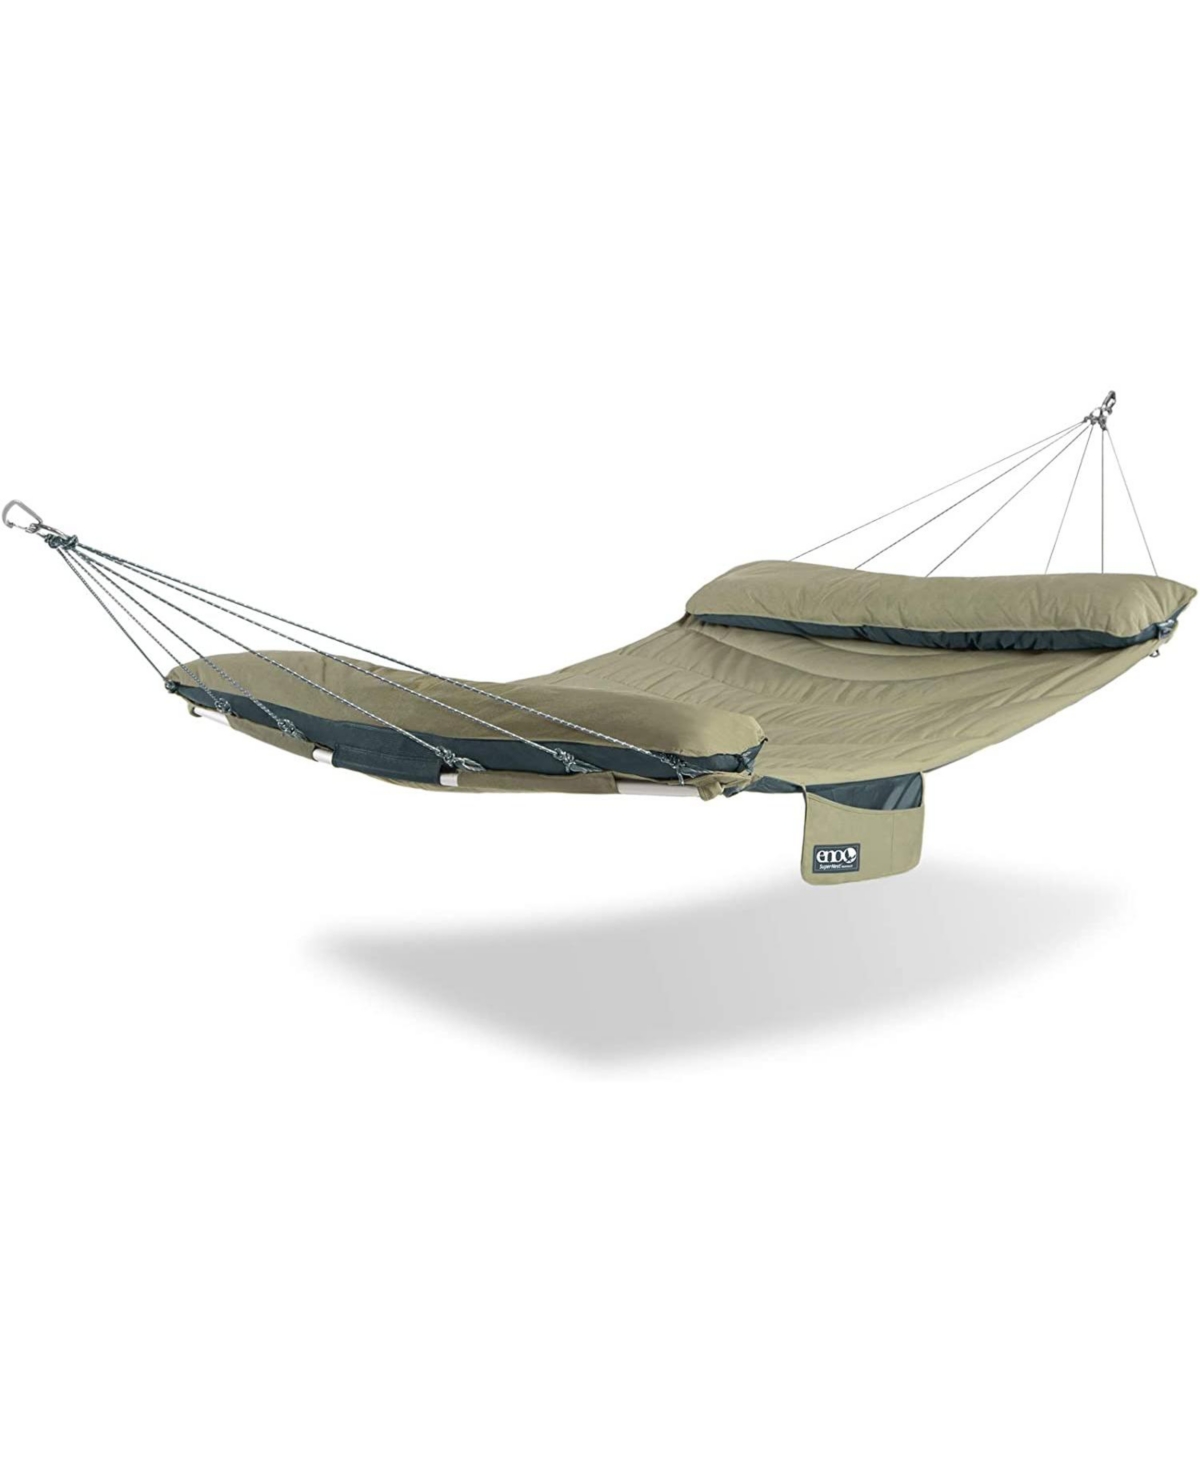 SuperNest Hammock - 1 to 2 Person Backyard Hammock - Outdoor Patio Furniture for Backyard, Lawn, Poolside, or Balcony - Heather Olive - Heather Ol